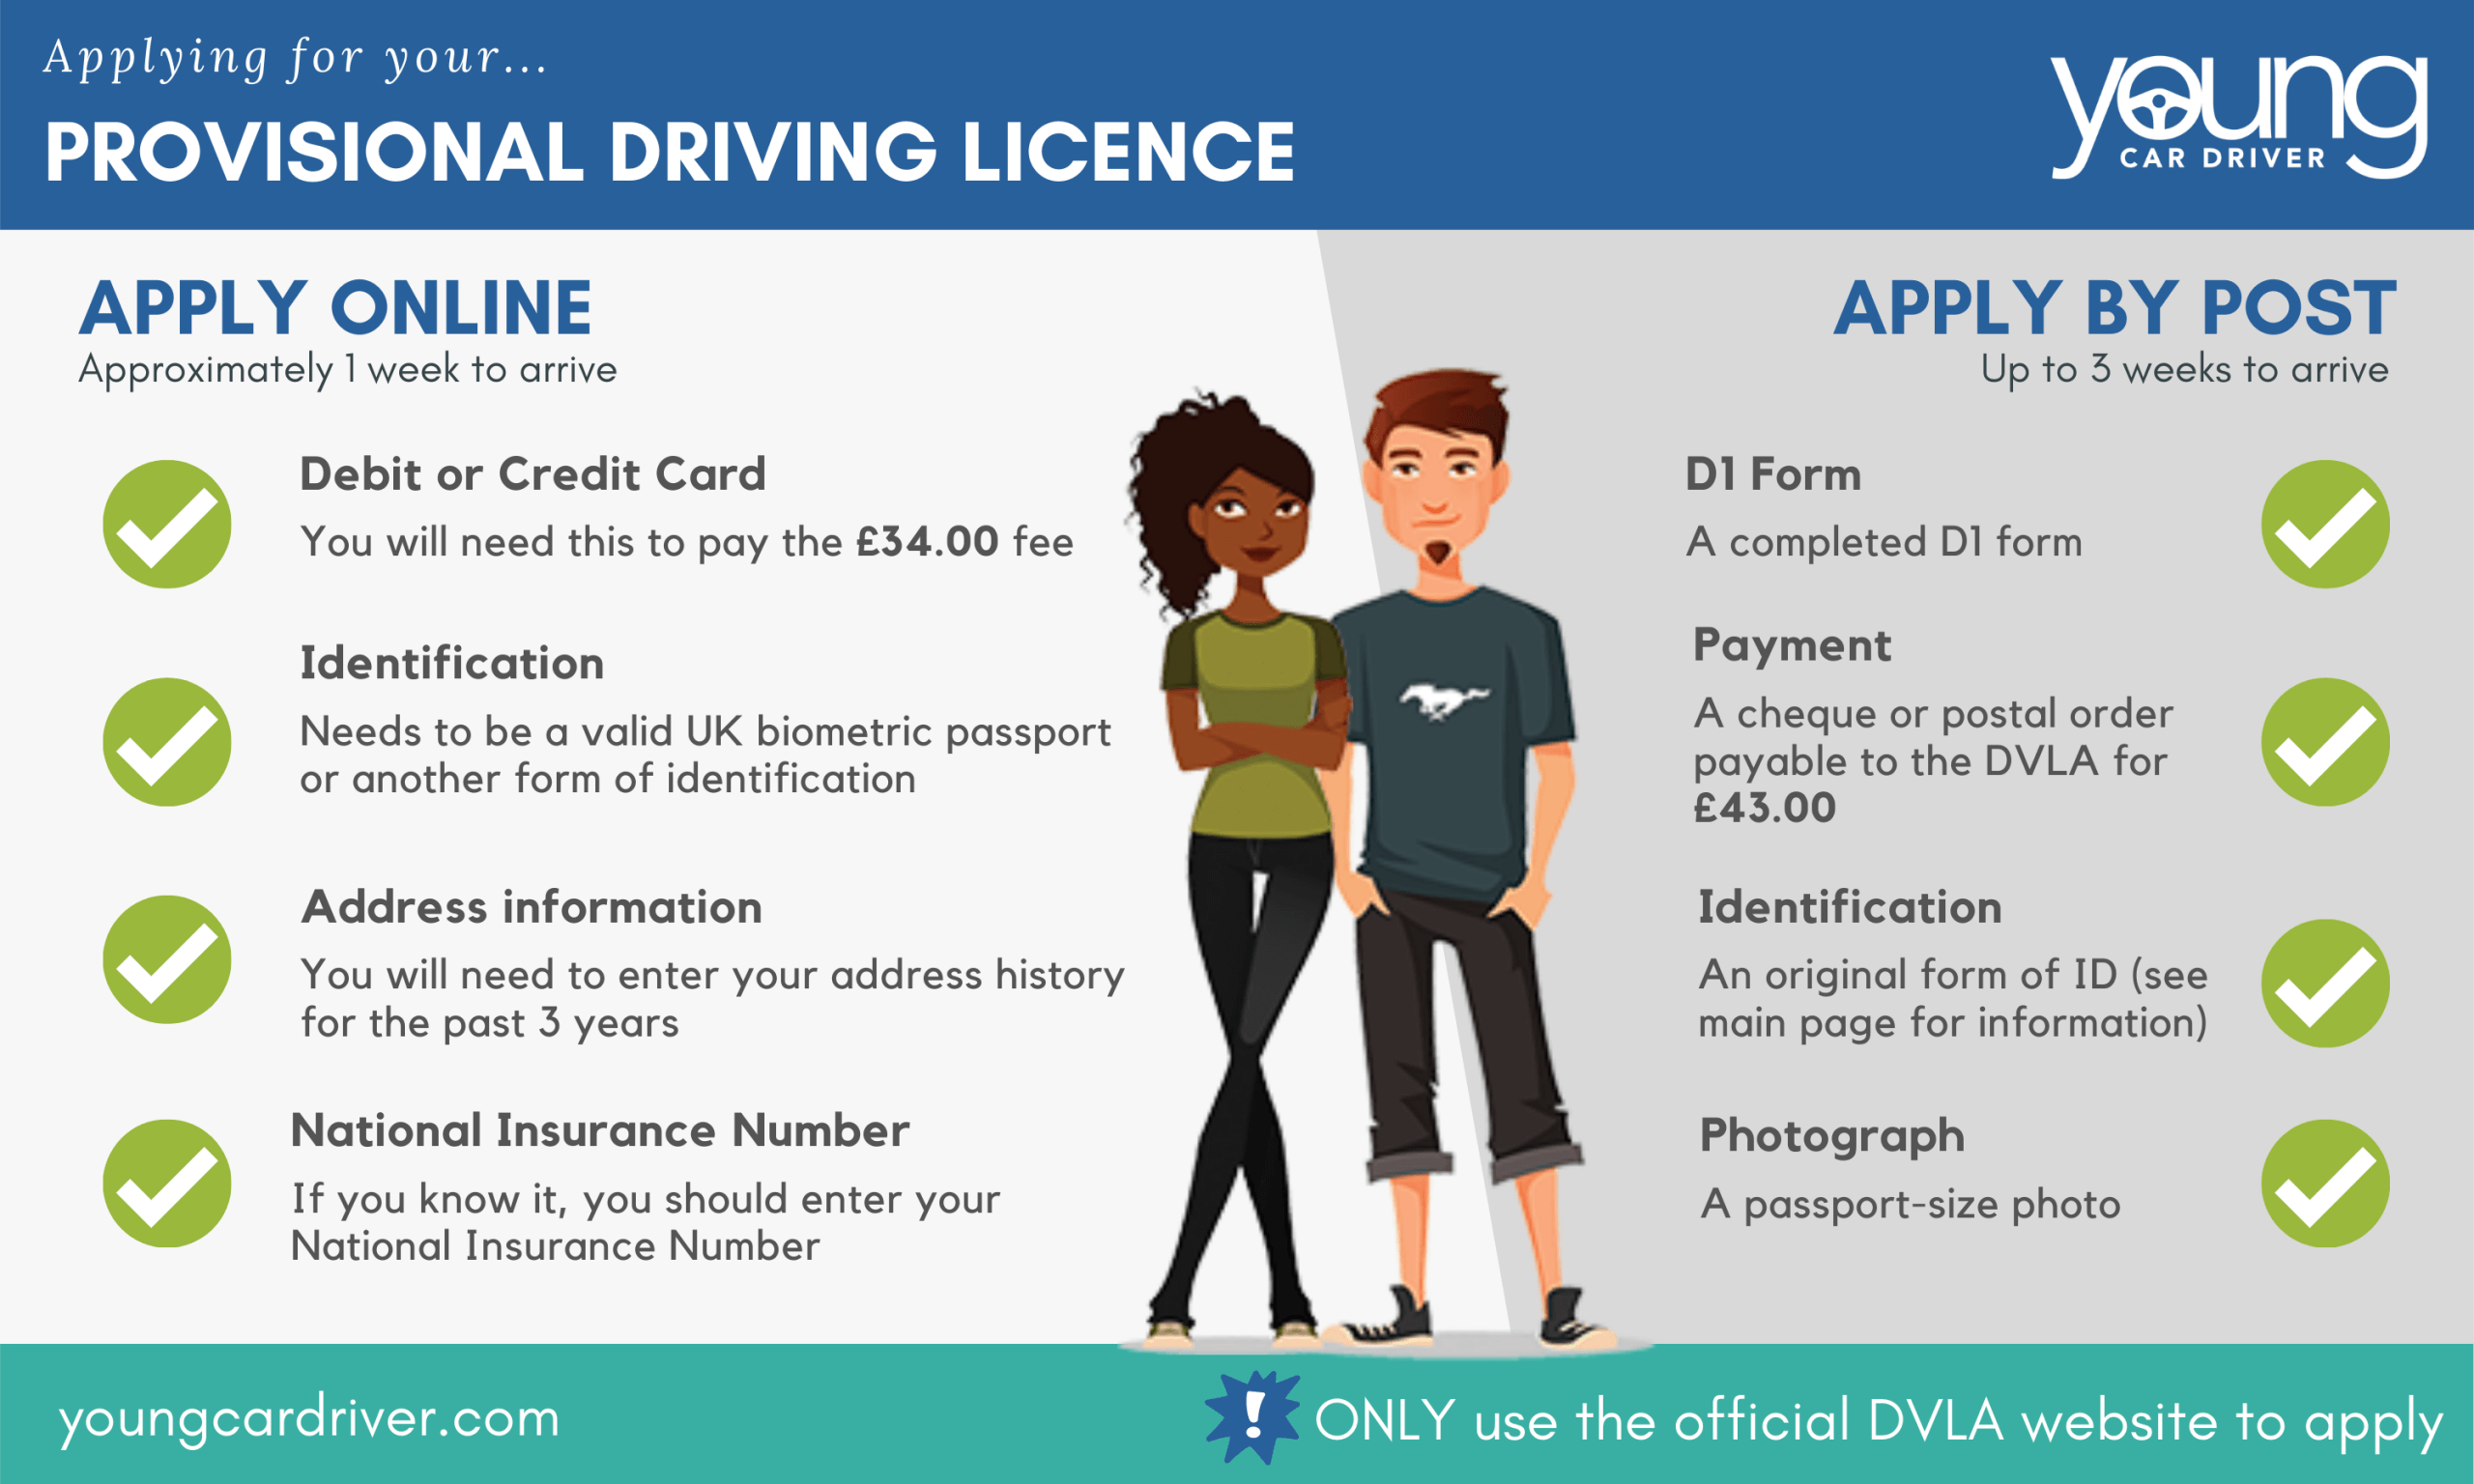 Applying for UK provisional driving licence